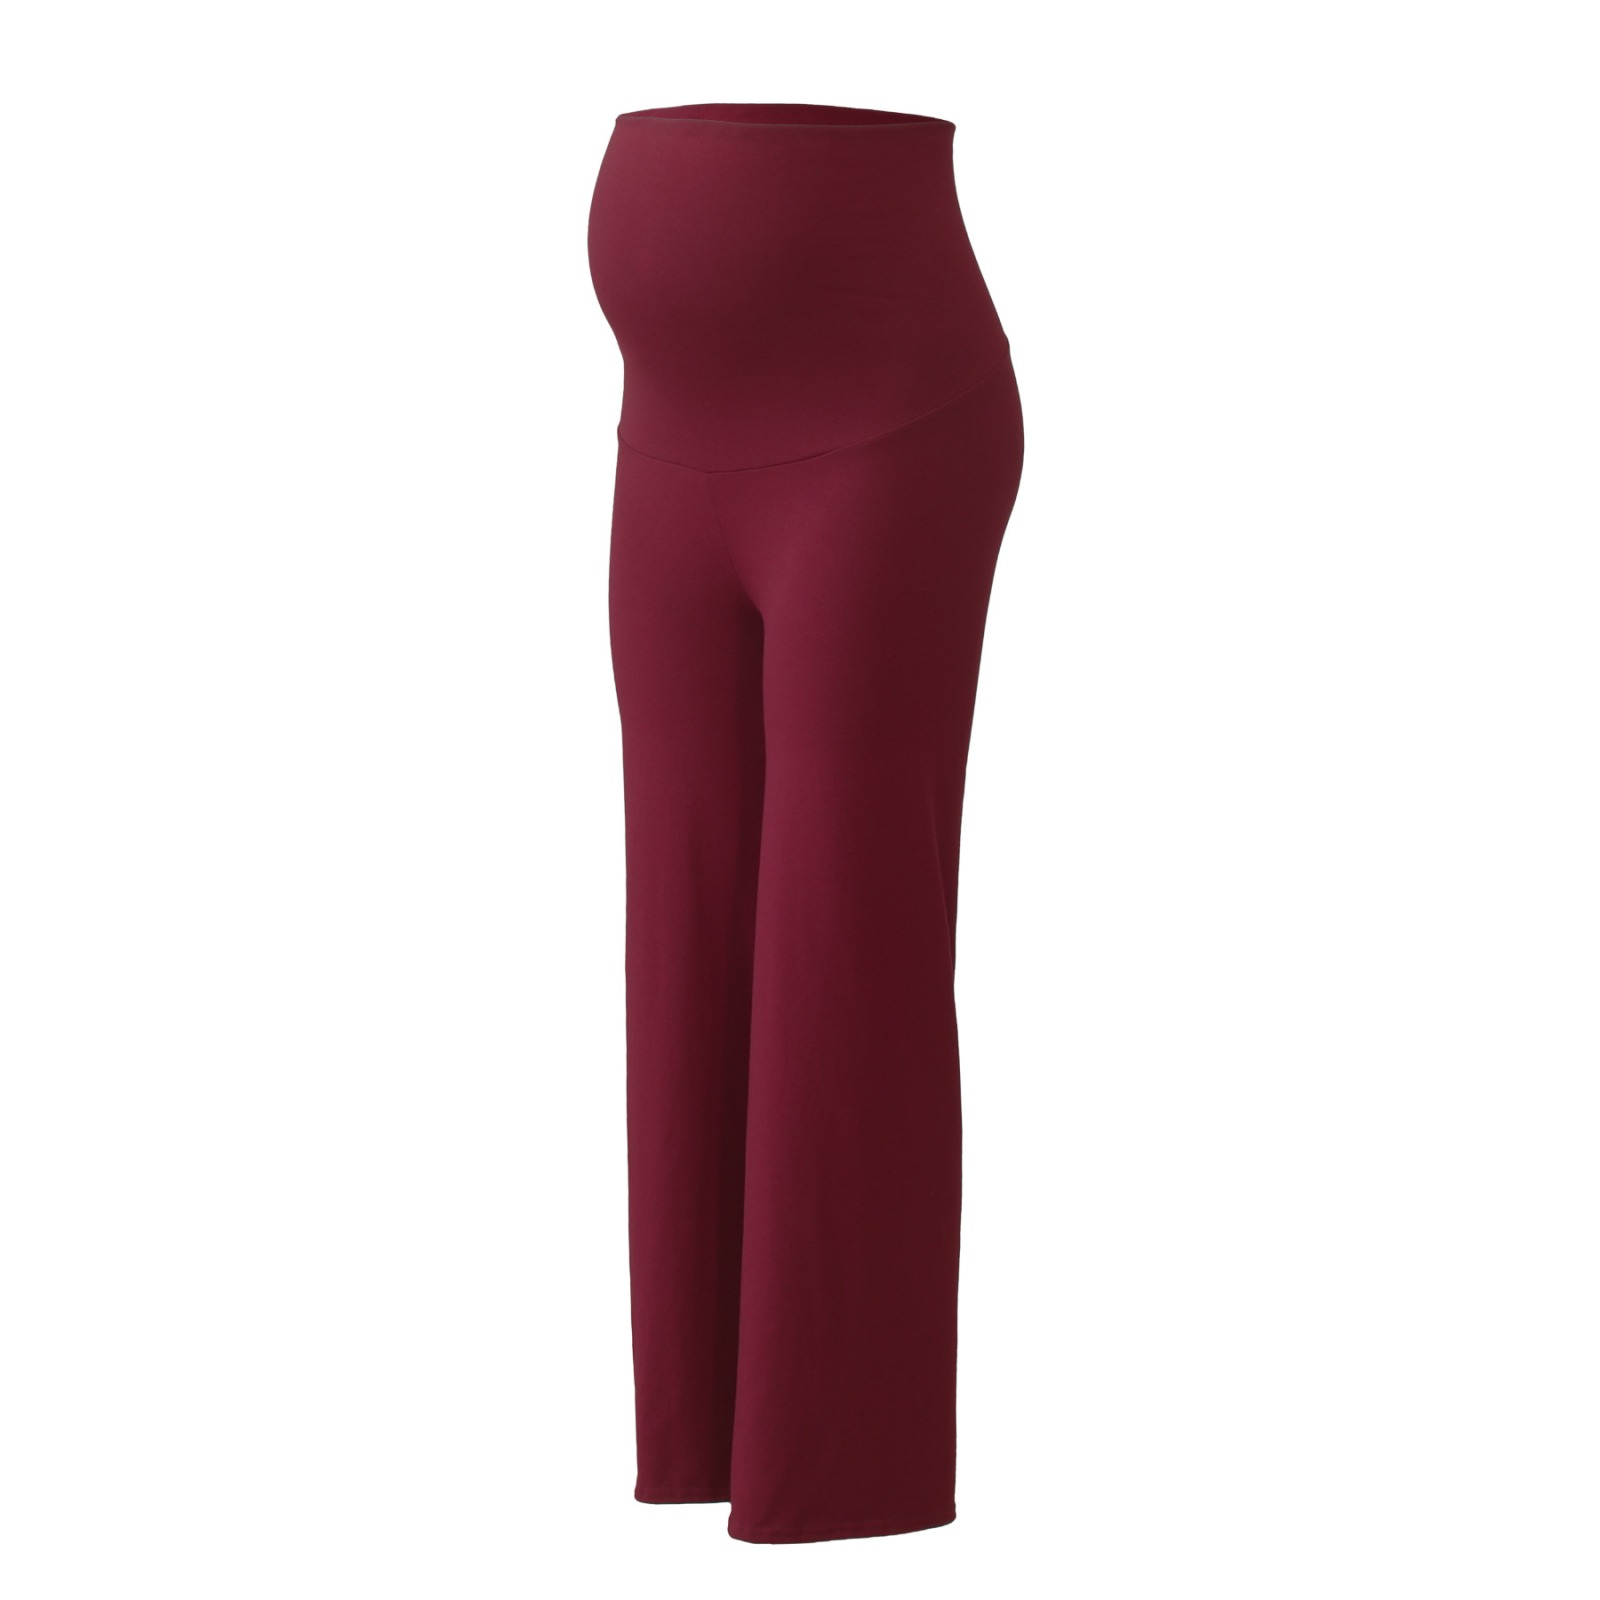 Mama Yoga pants Relaxed Fit aubergine red